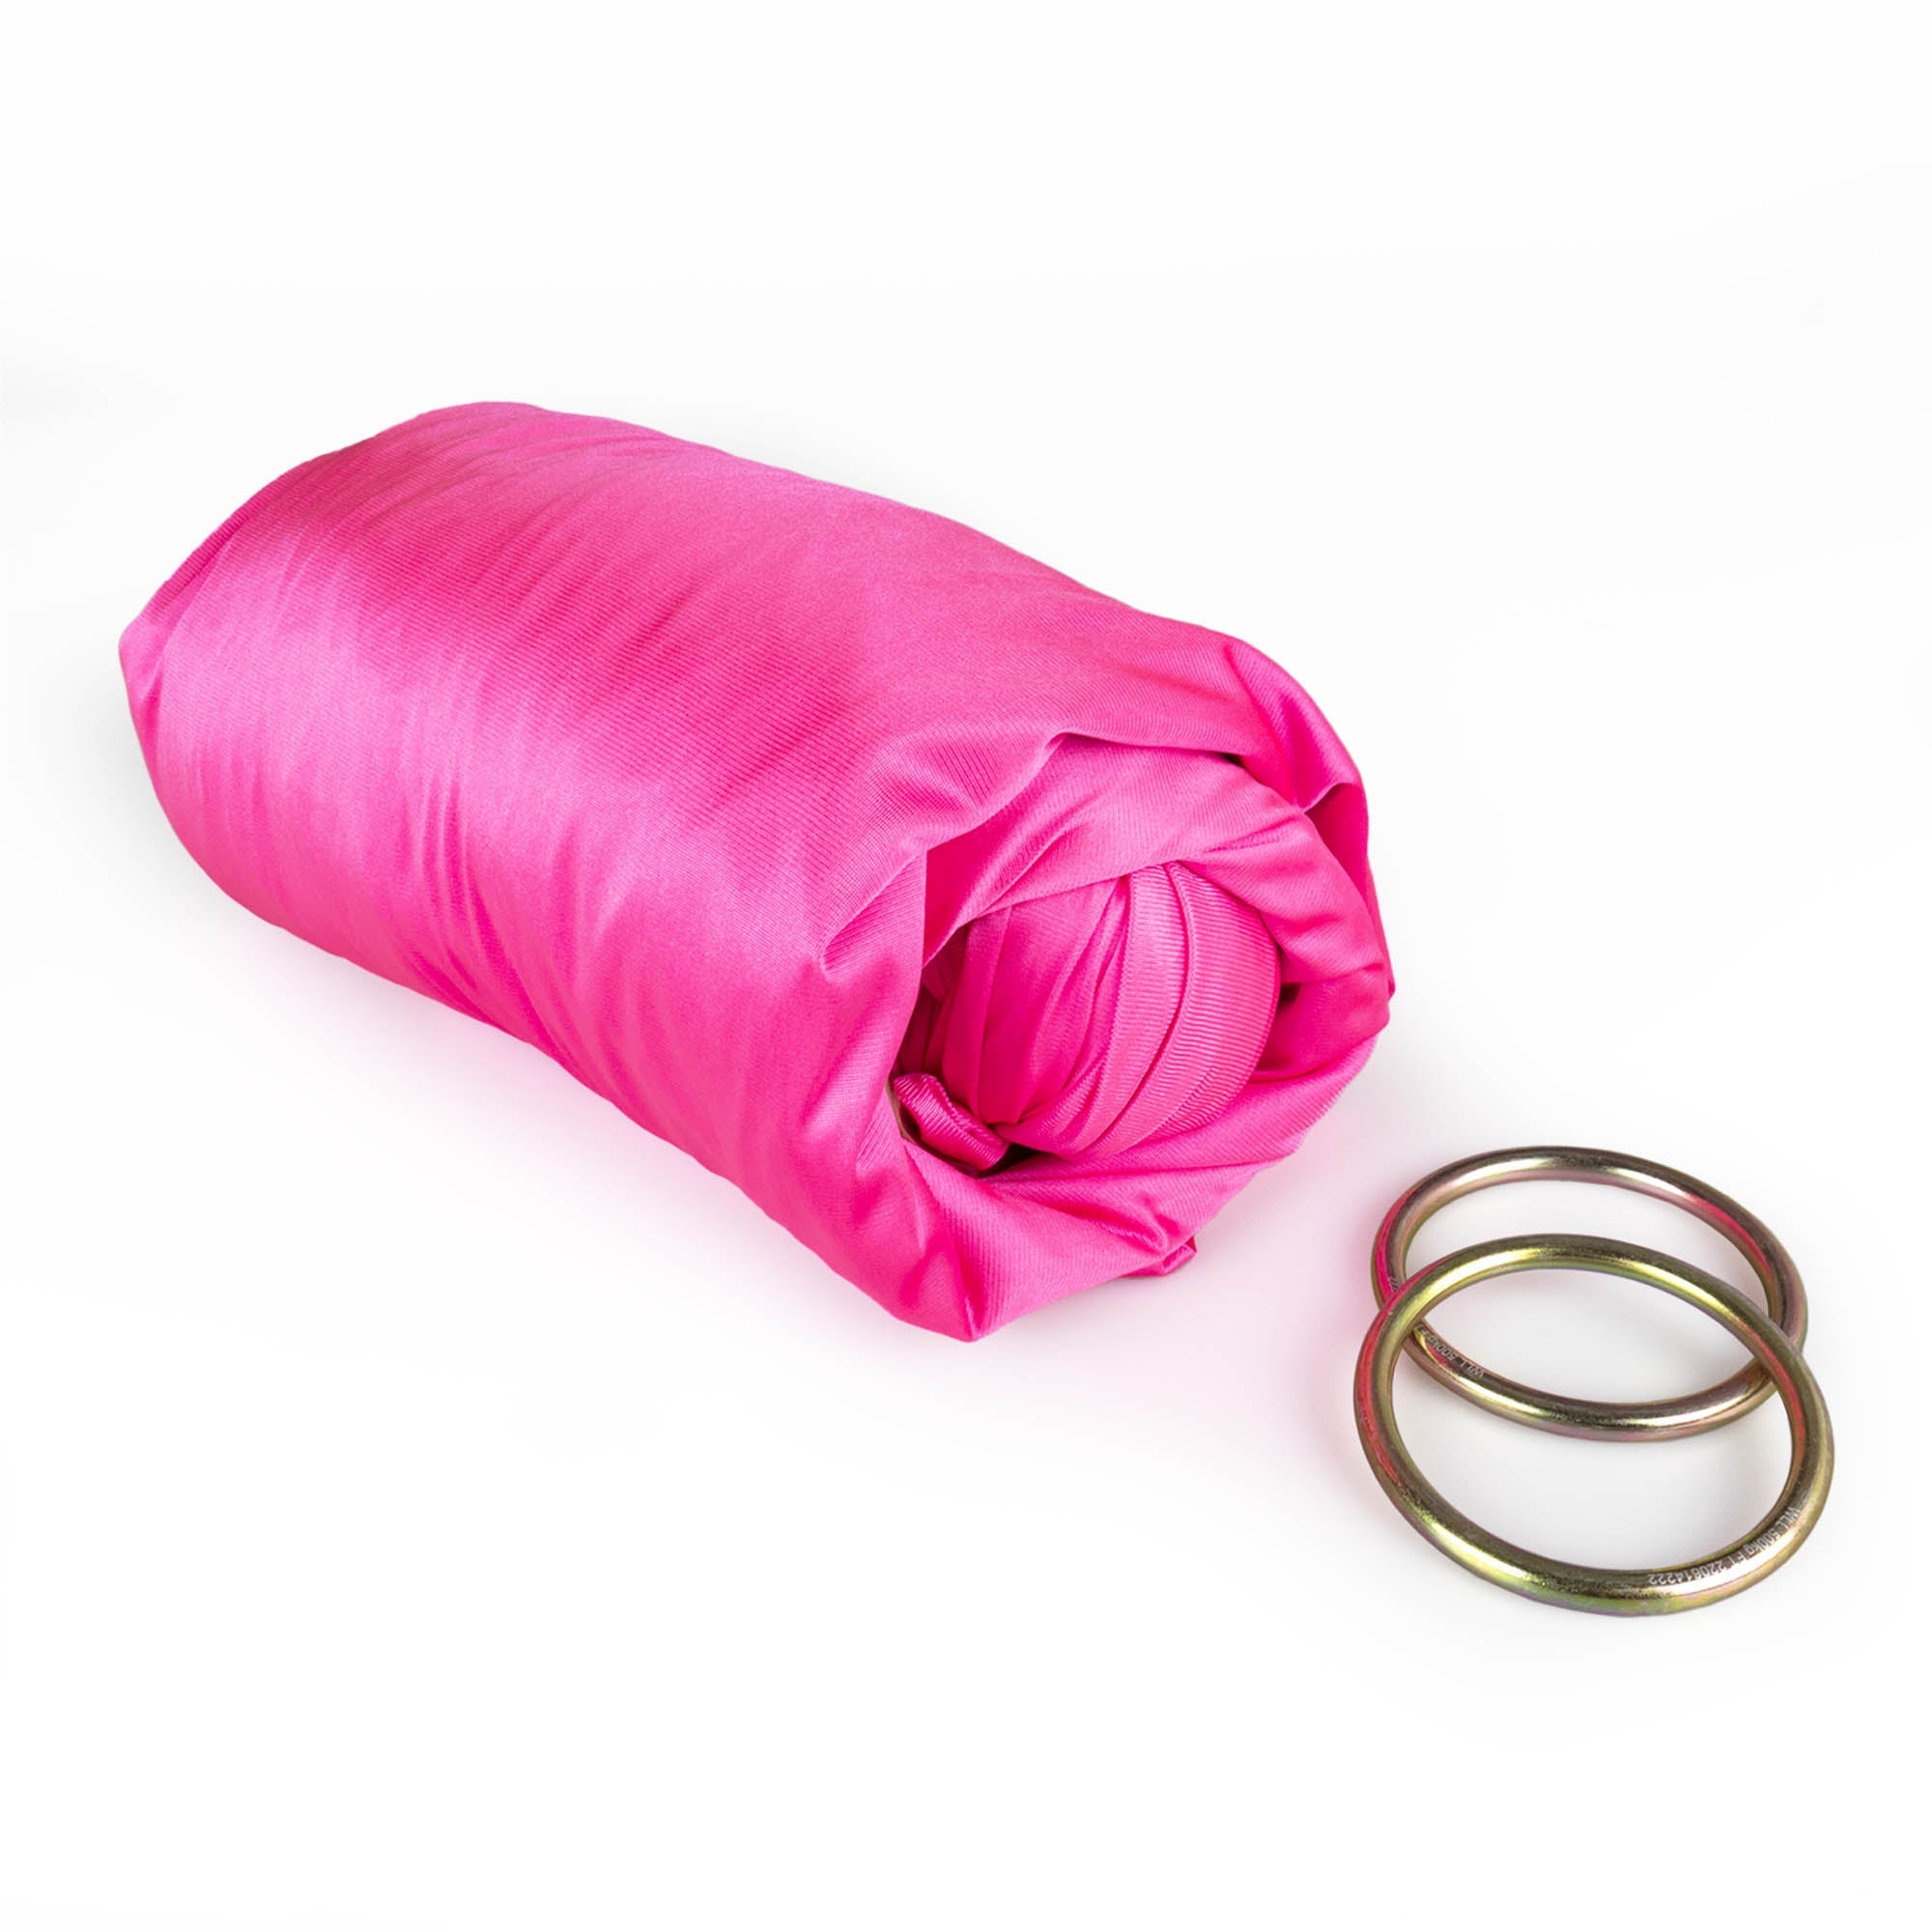 Pink yoga hammock rolled up with rings detached